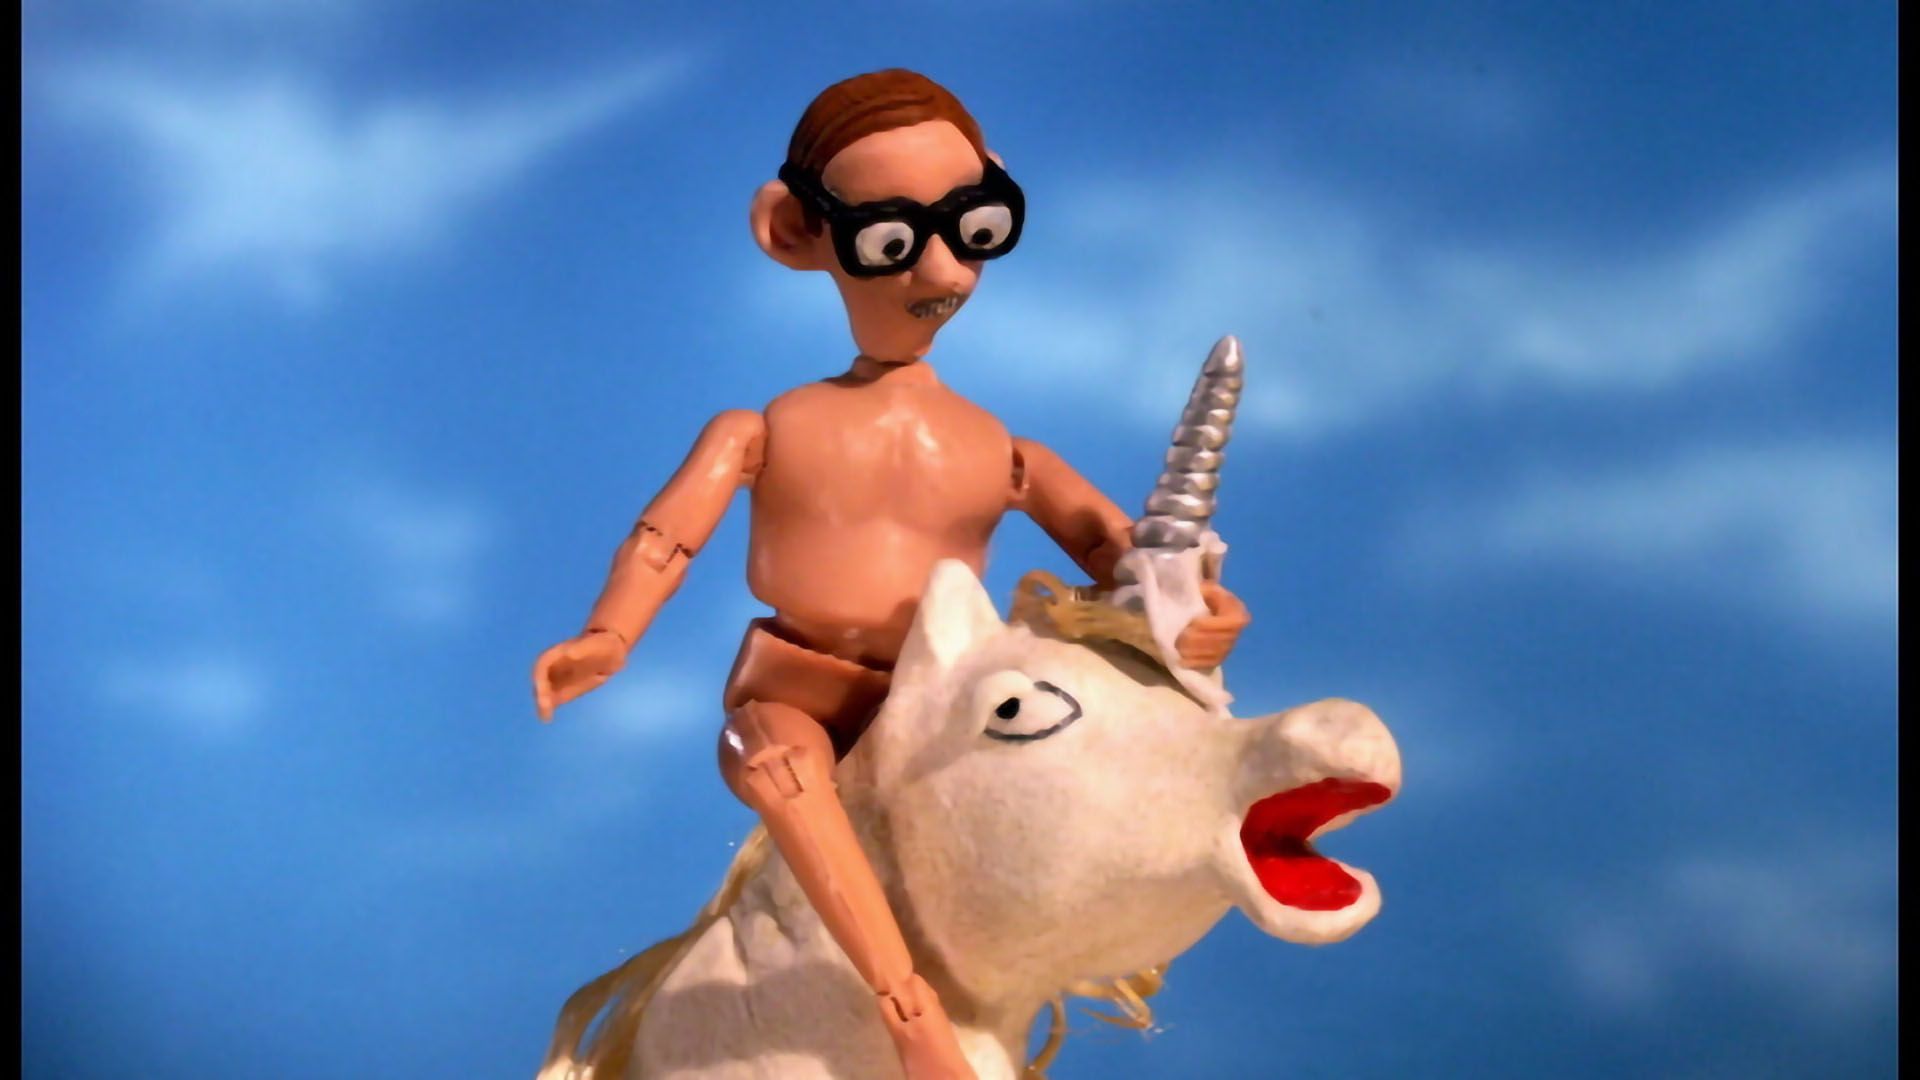 Watch Robot Chicken Episodes and Clips for Free from Adult Swim